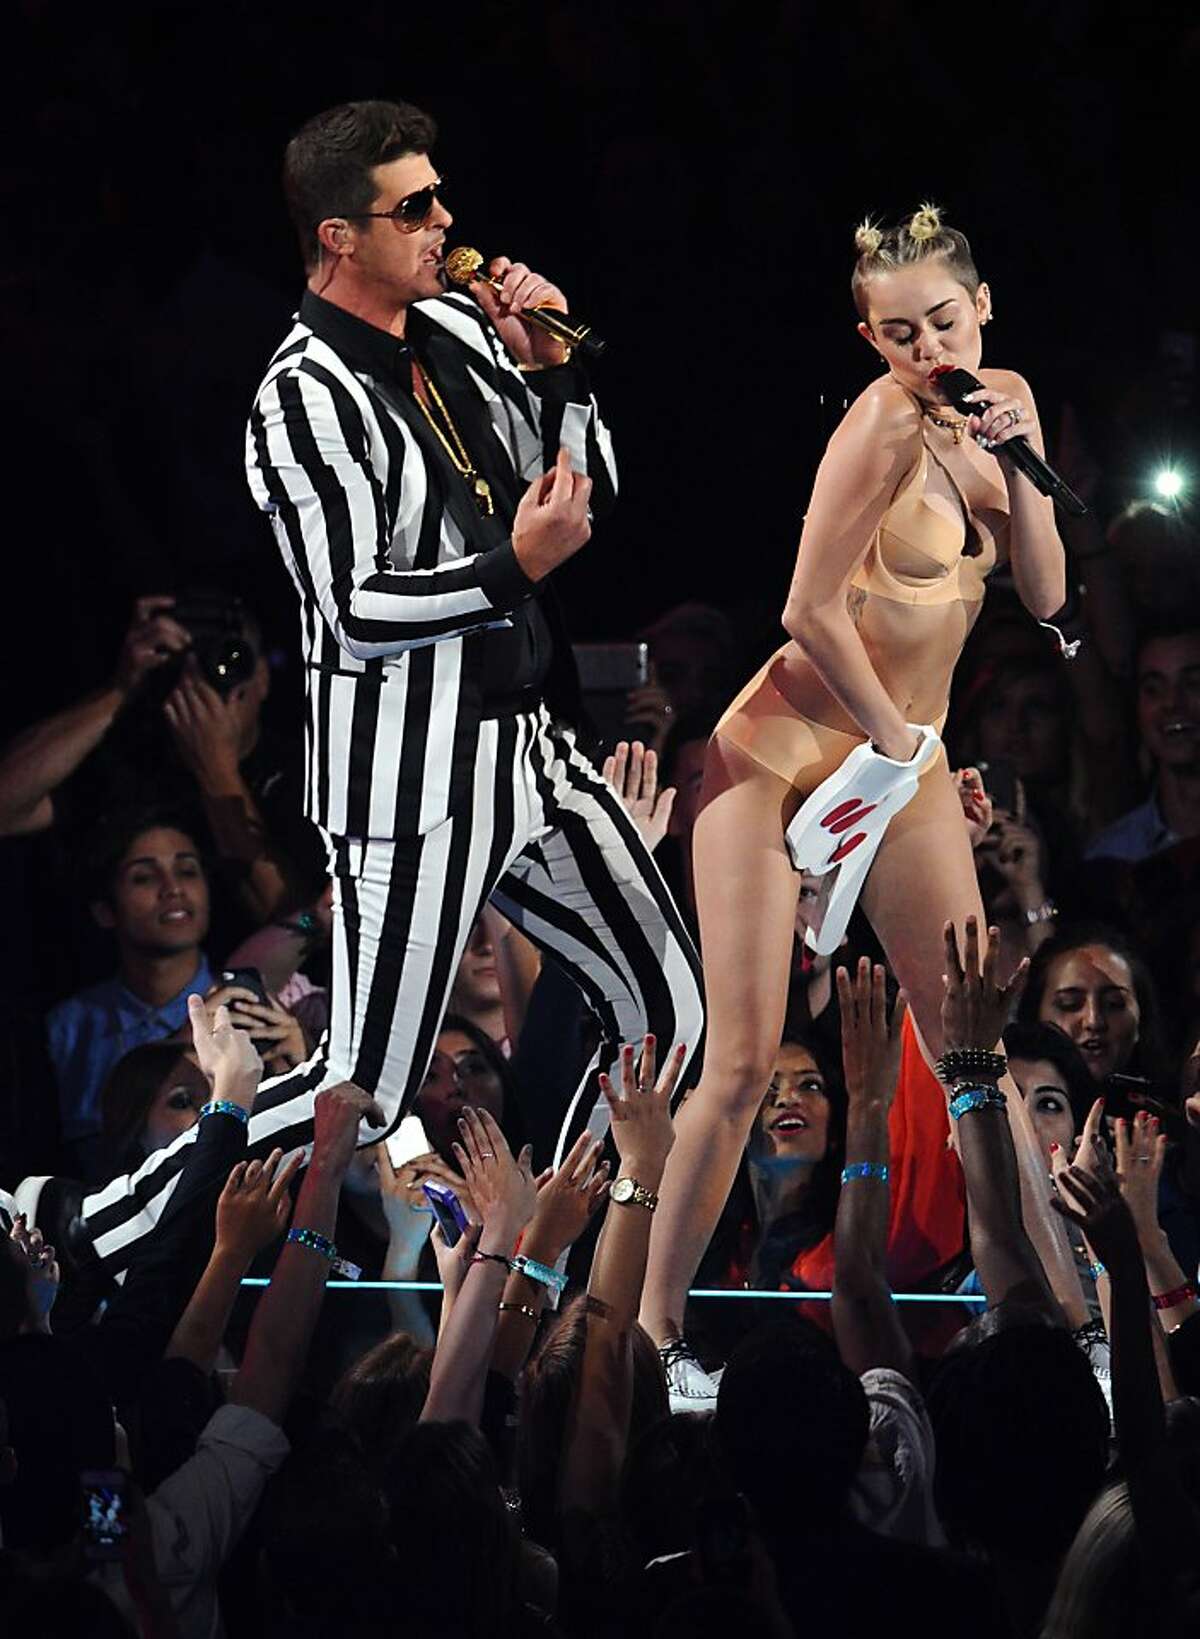 Miley Cyrus, 21, is the top choice on our list as the most-buzzed-about fashion victim thanks to her overt display of latex (and sexuality) while twerking at the MTV Video Music Awards. Even Vogue editor Anna Wintour was so appalled by the star’s lightning rod performance —and, later, by Cyrus’ barely there wardrobe choices — that she decided to nix her as the magazine’s December cover girl. Enter Cosmopolitan, which has Cyrus doused in bling on its December cover.